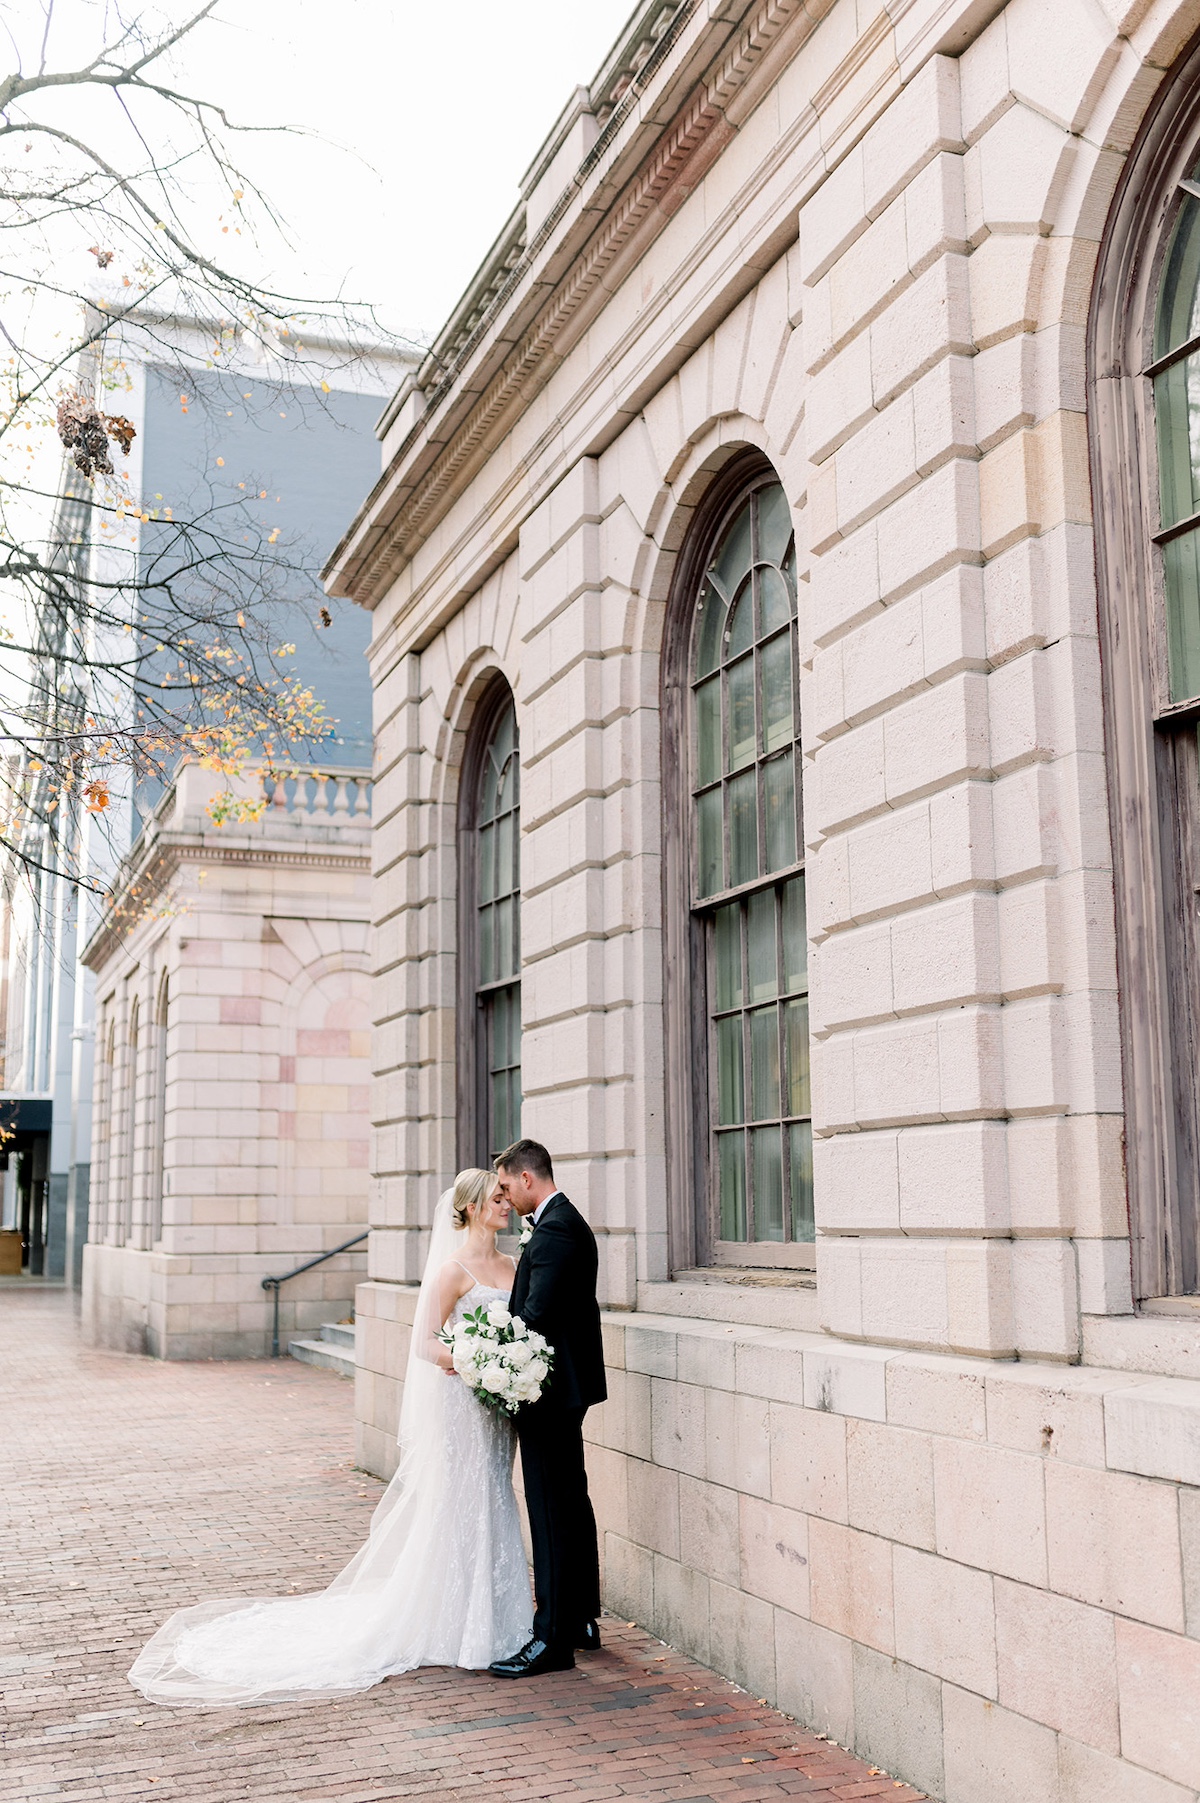 Iconic landmarks of Lancaster City frame an editorial portrait of the bride and groom, epitomizing their high-end love story against cityscapes.